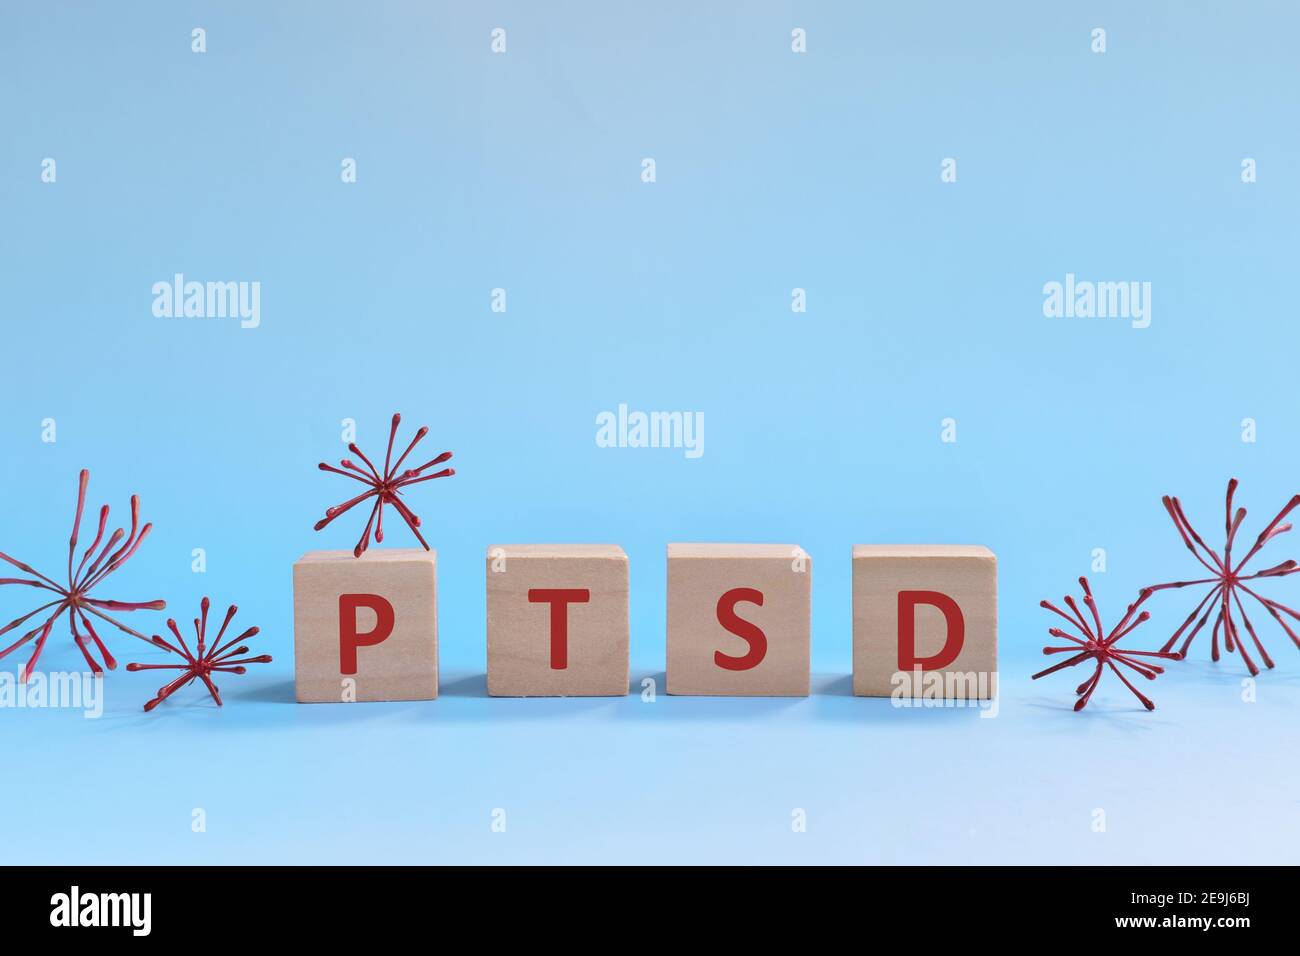 PTSD letters in wooden blocks on blue background. Coping with anxiety, stress, ptsd and depression during covid-19 pandemic concept. Stock Photo